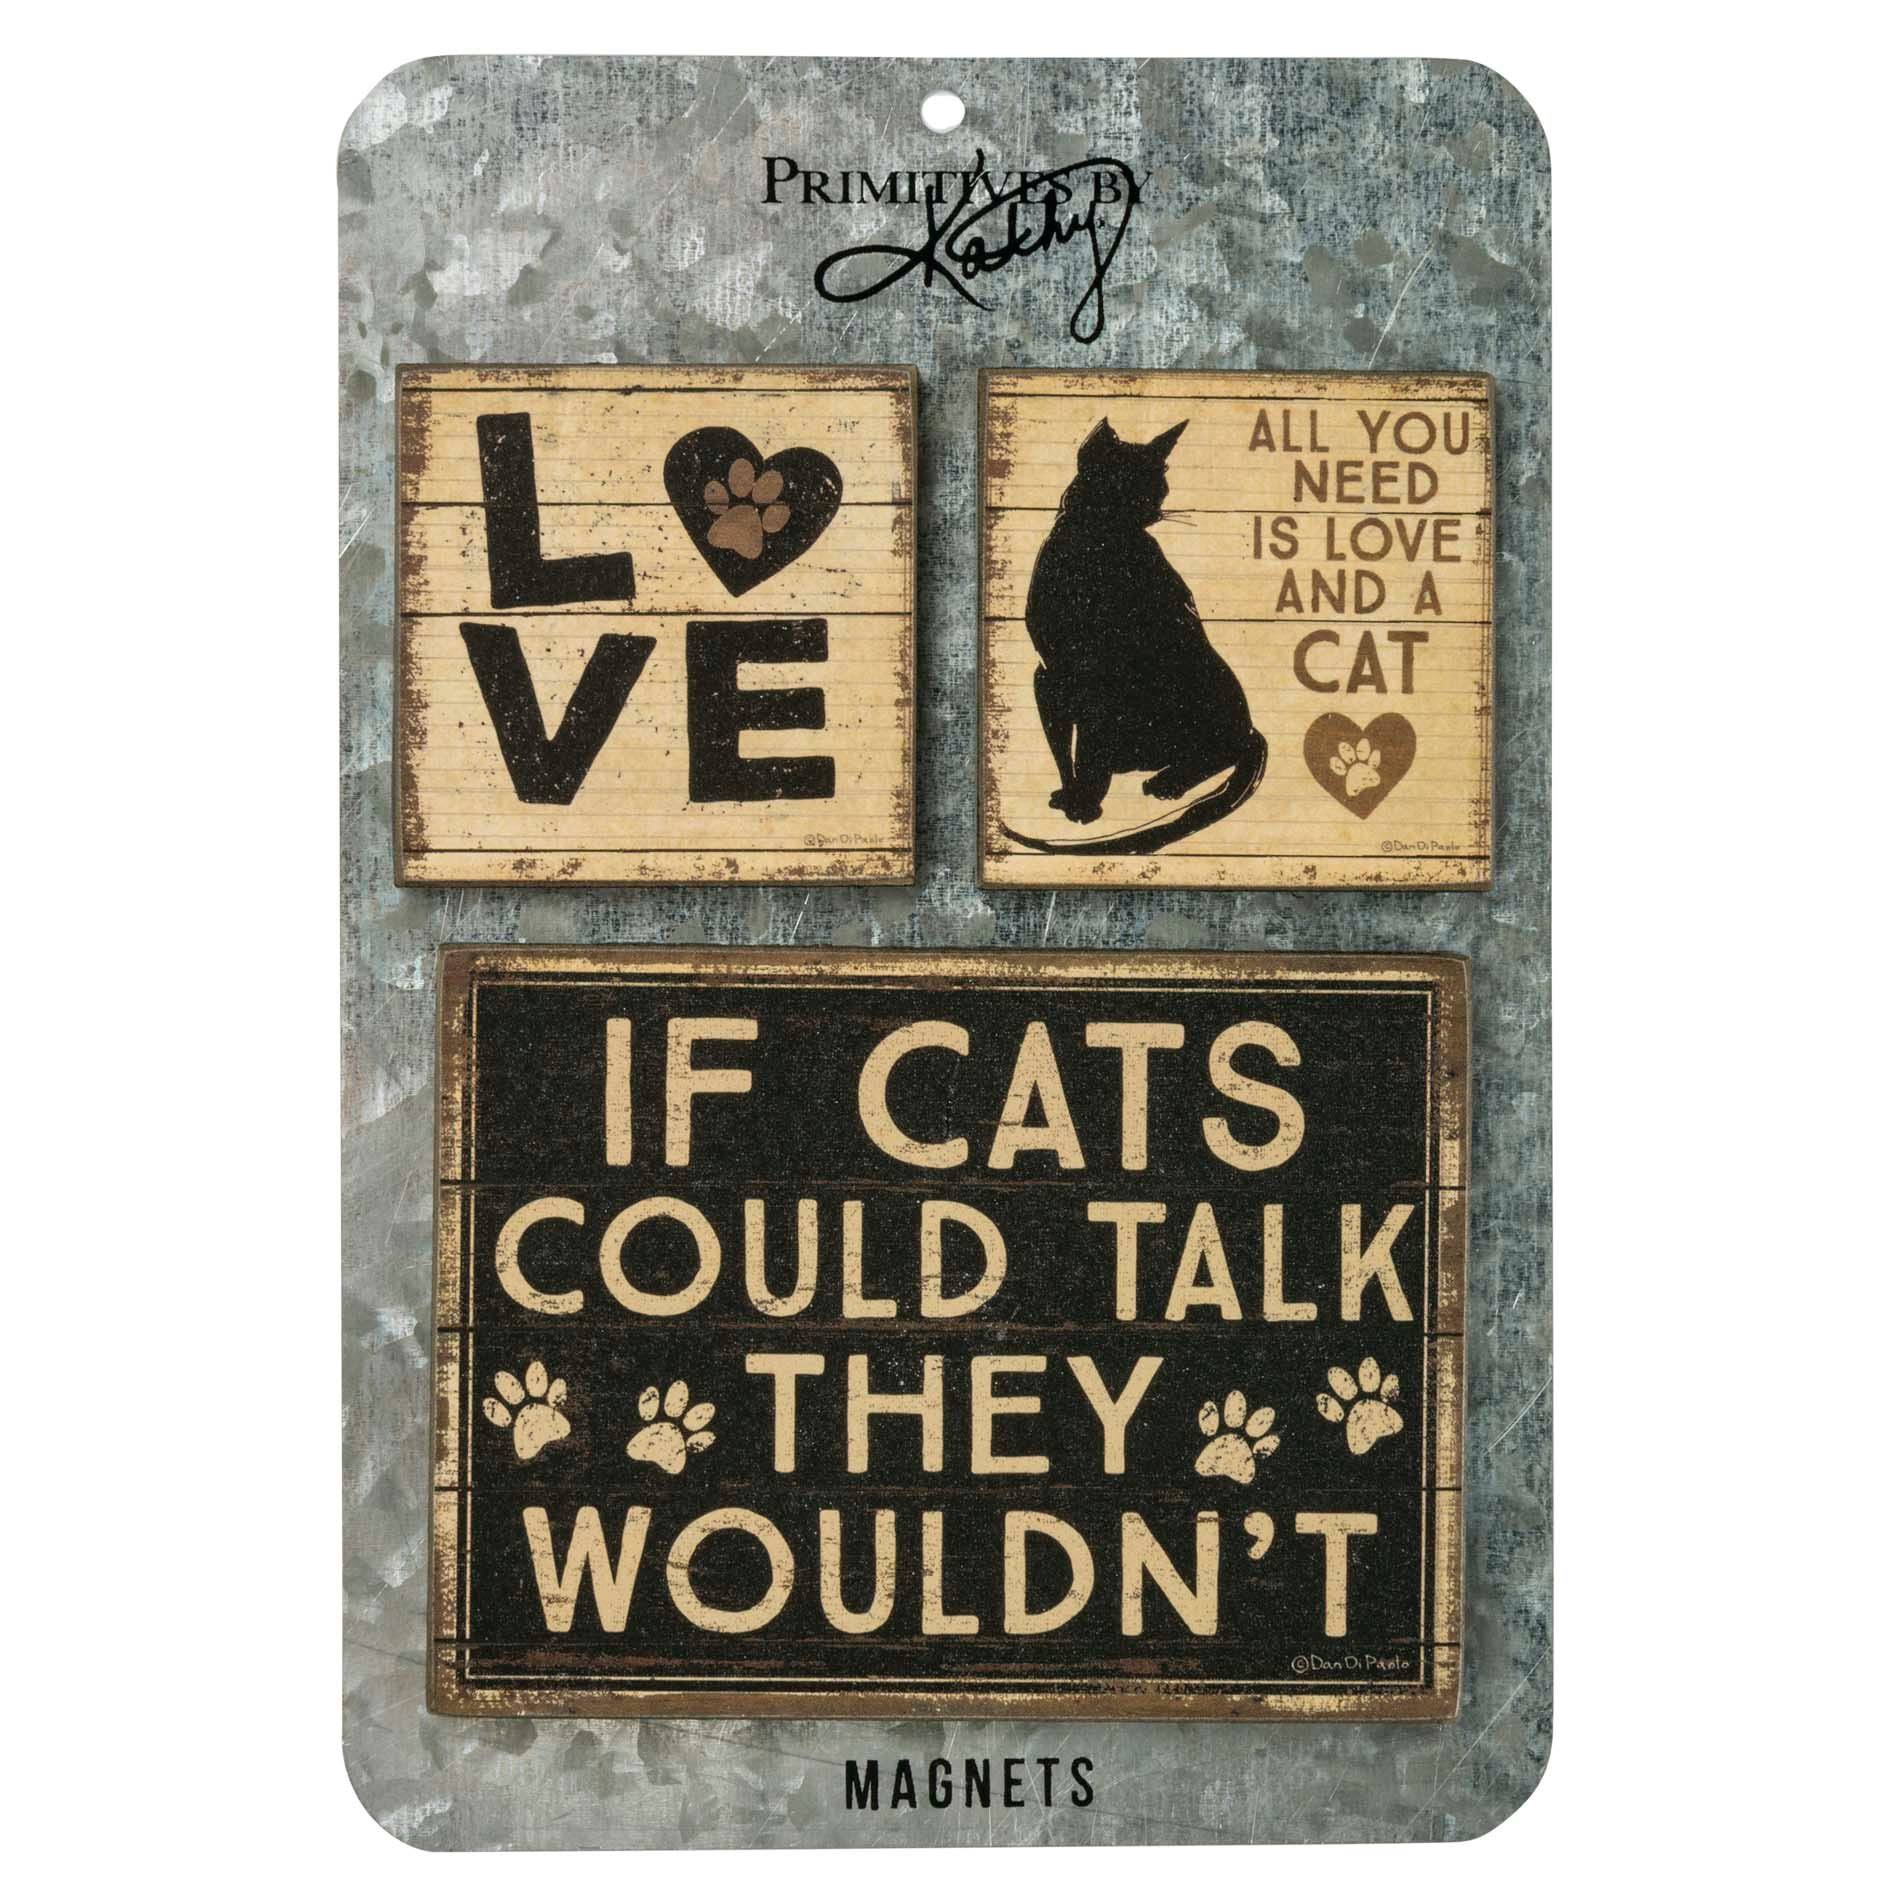 Primitives by Kathy Rustic Style Magnets, Set of 3, All You Need Is Love and A Cat